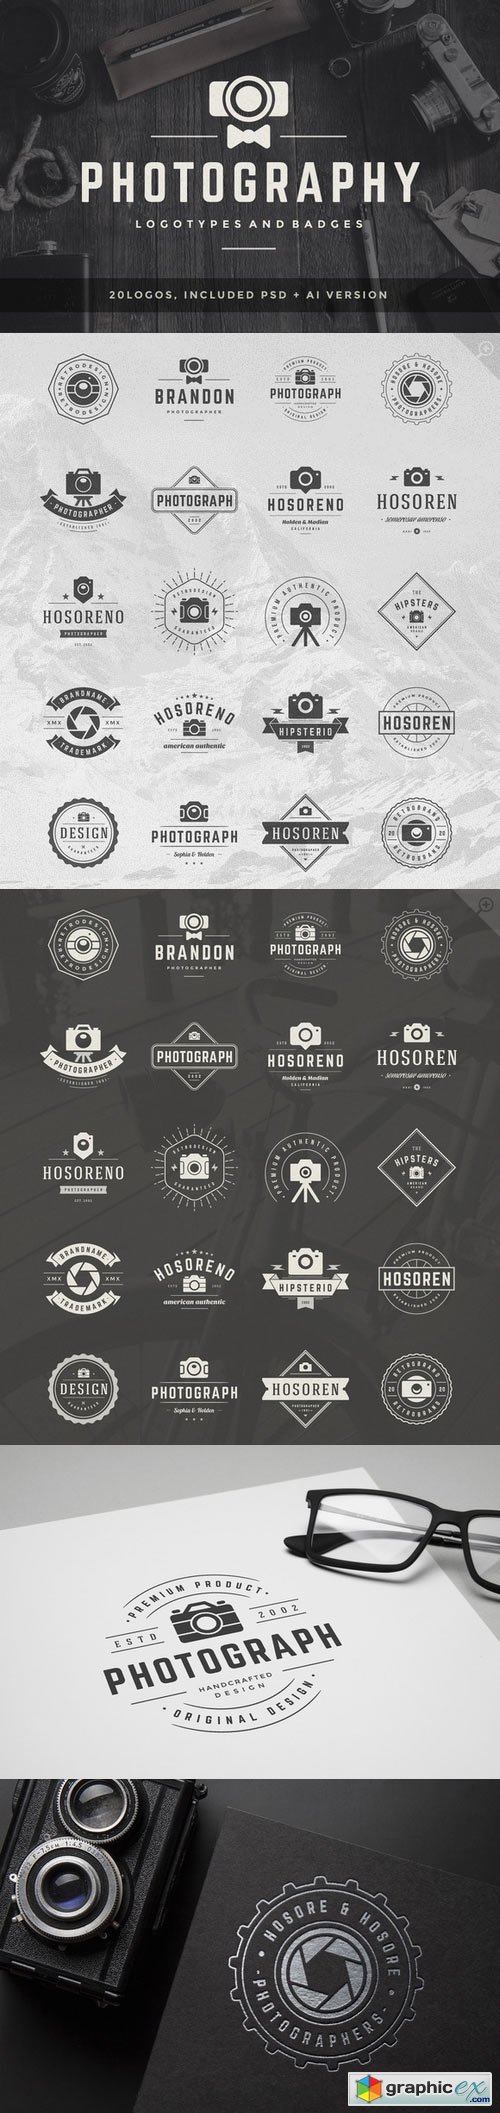 20 Photography logos and badges